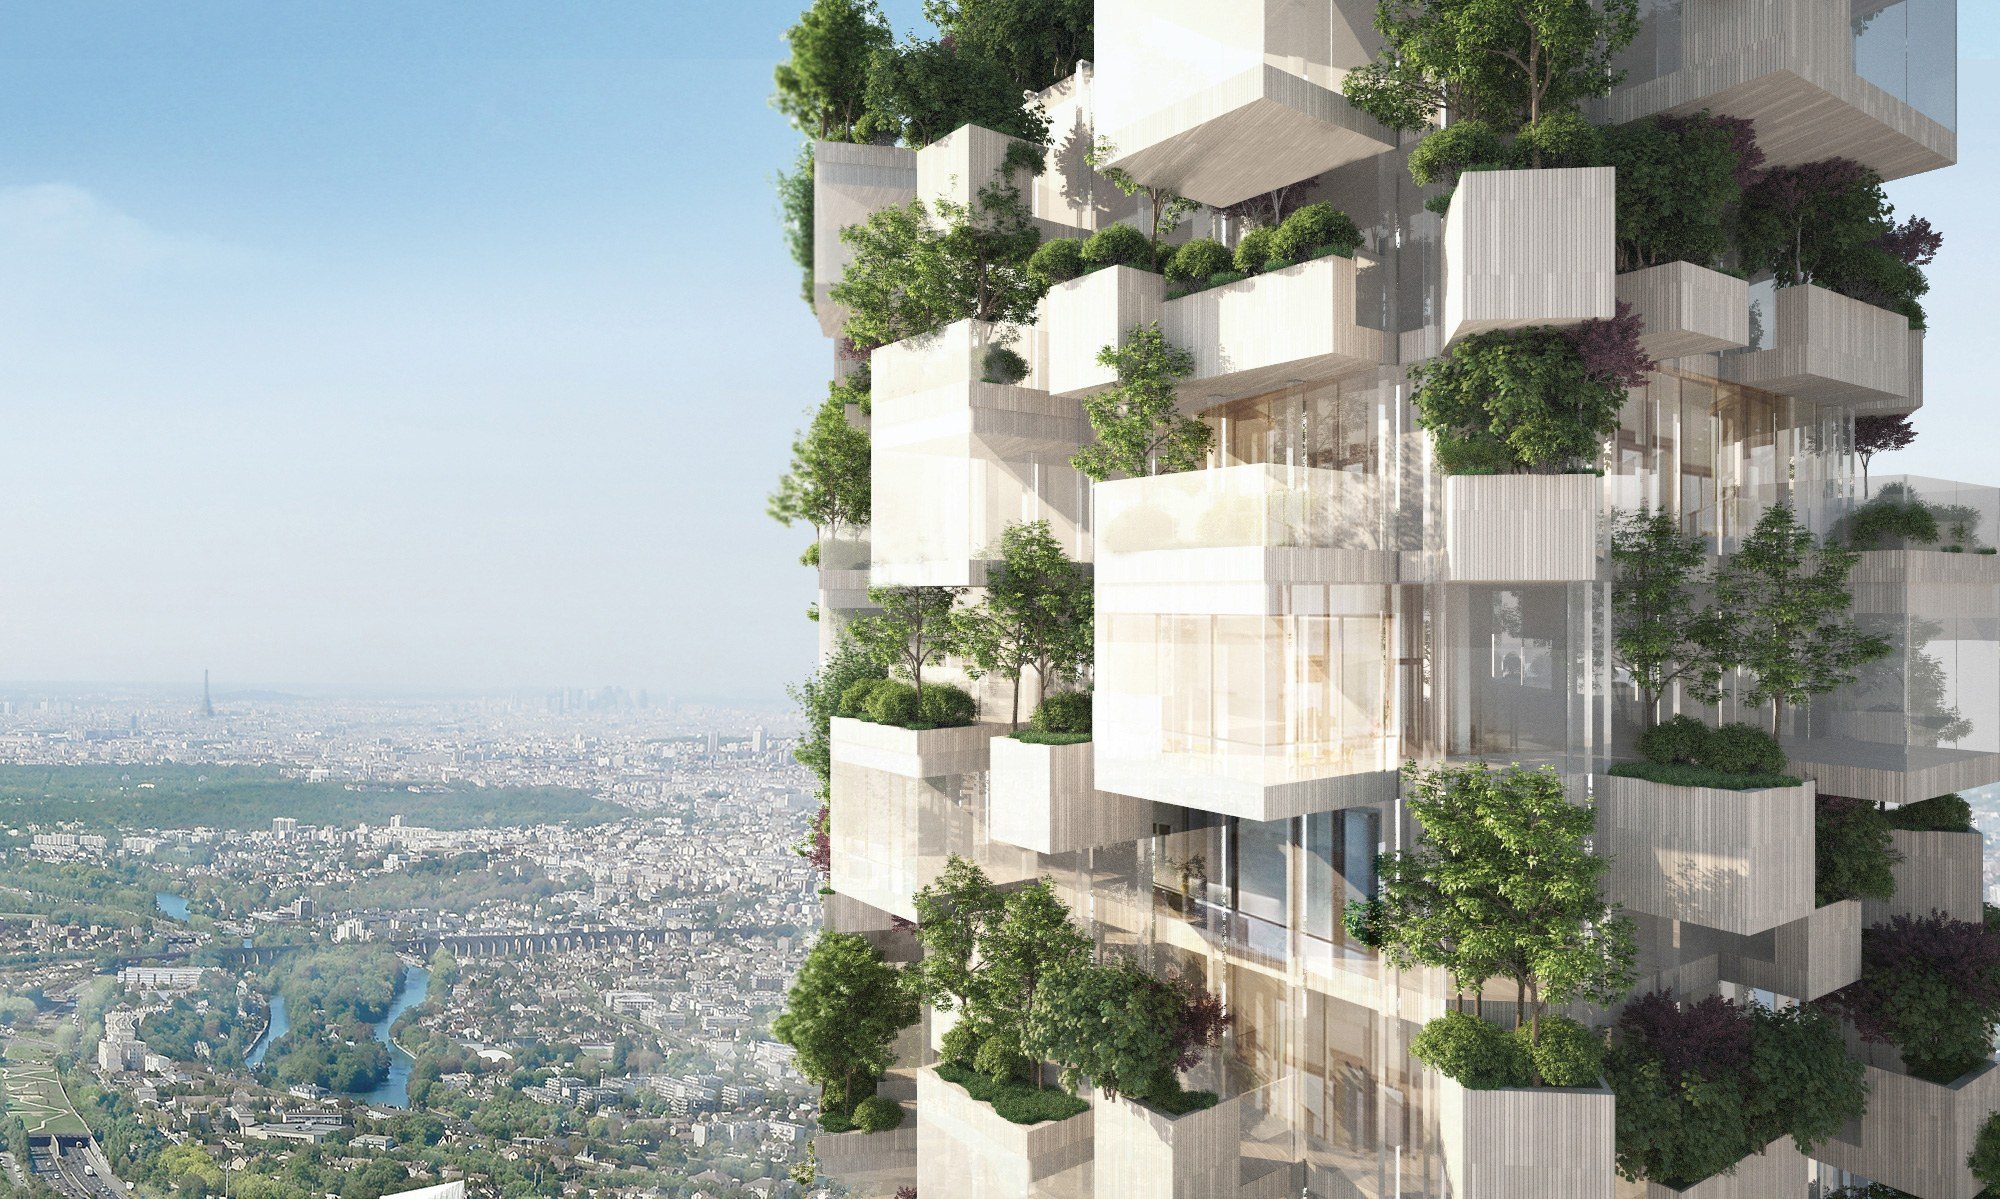 Rendering of Stefano Boeri-designed tower in Paris with plants on facade